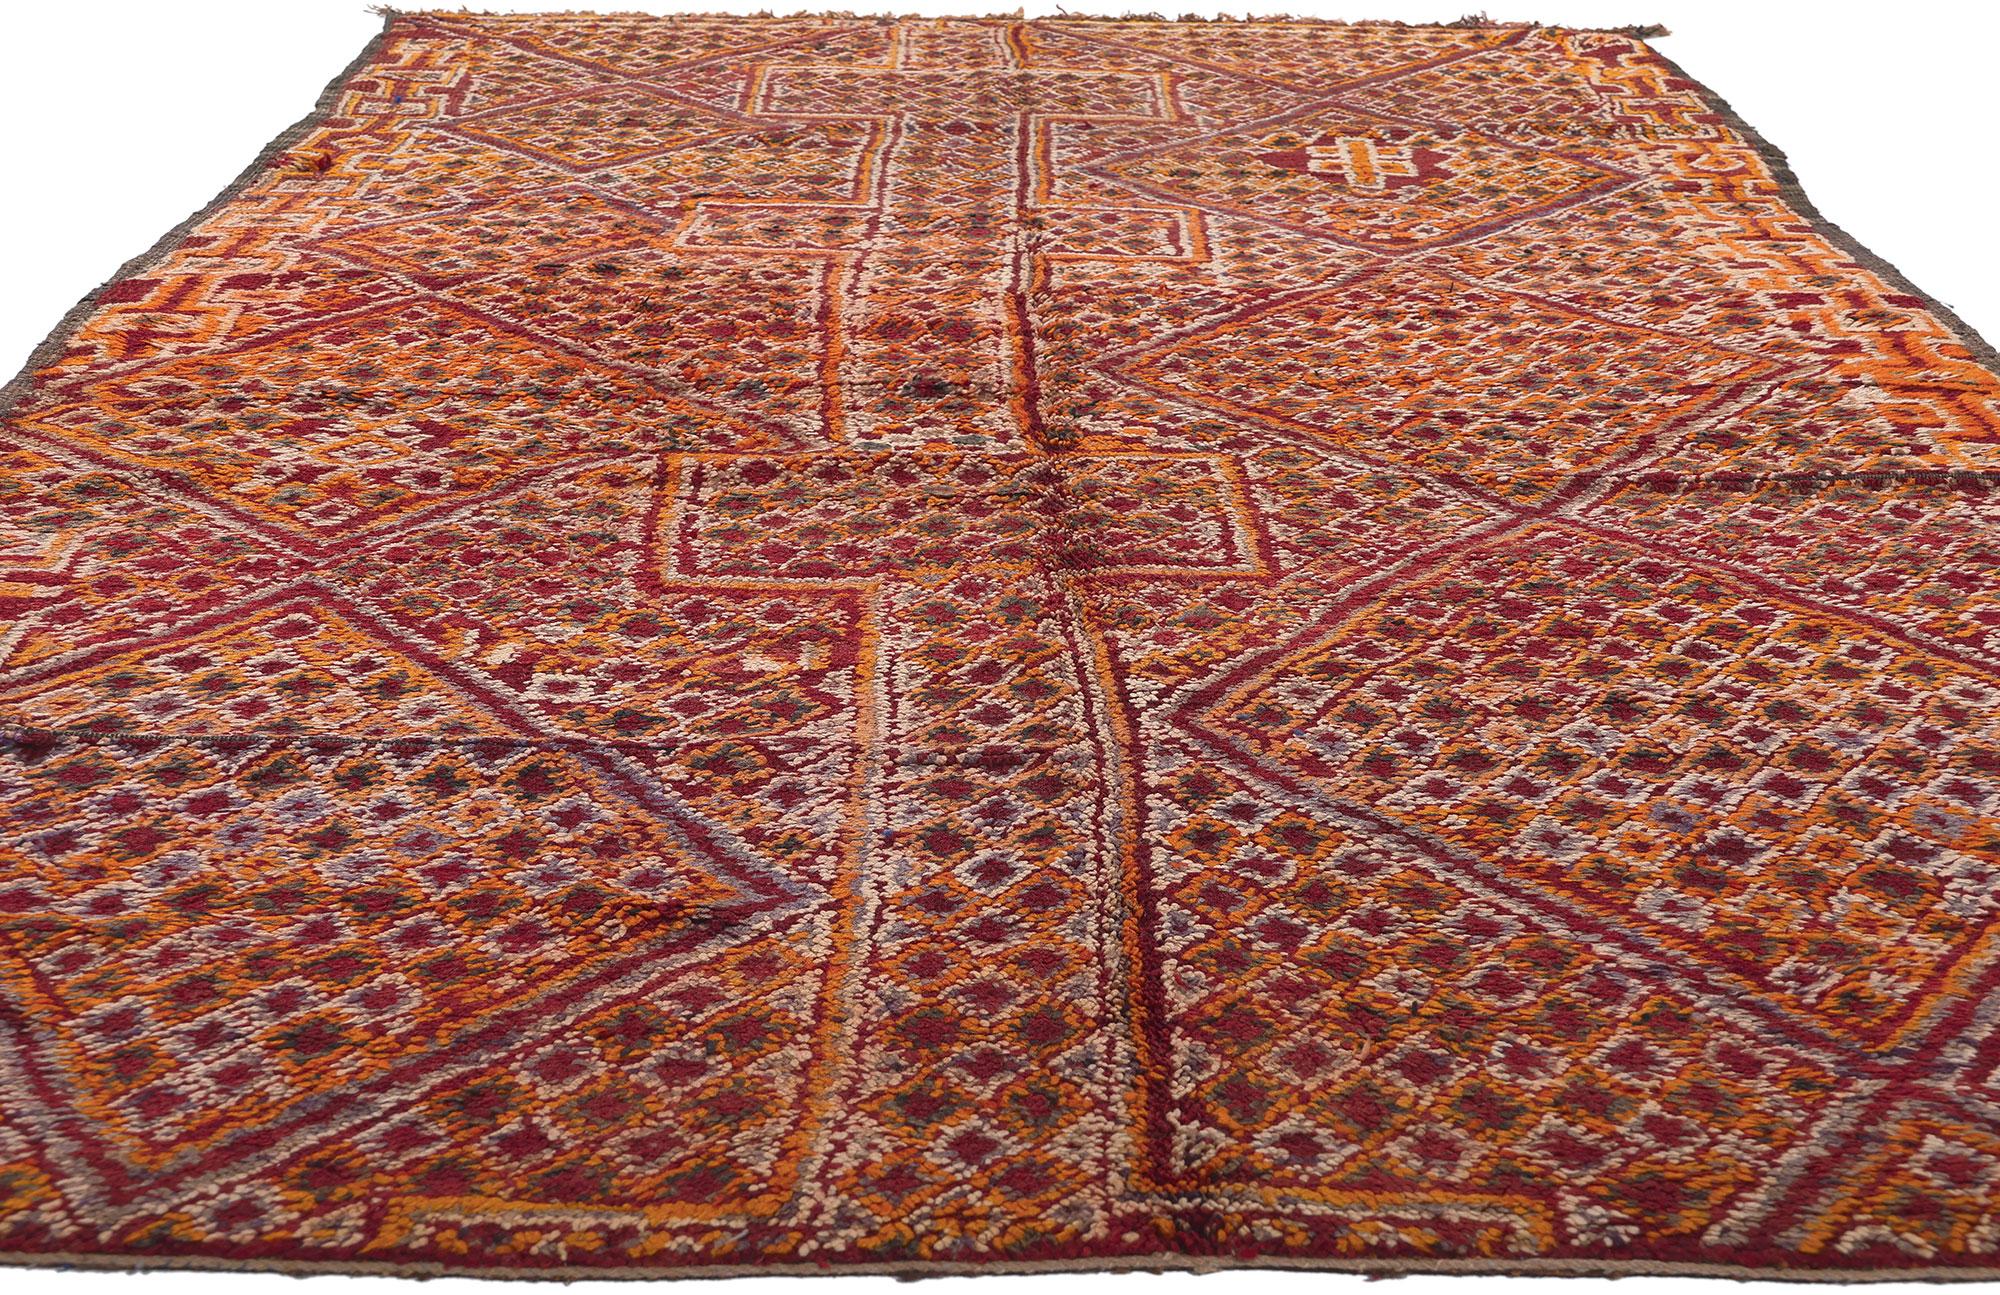 Bohemian Vintage Beni MGuild Moroccan Rug, Irresistibly Chic Meets Sophisticated Boho For Sale